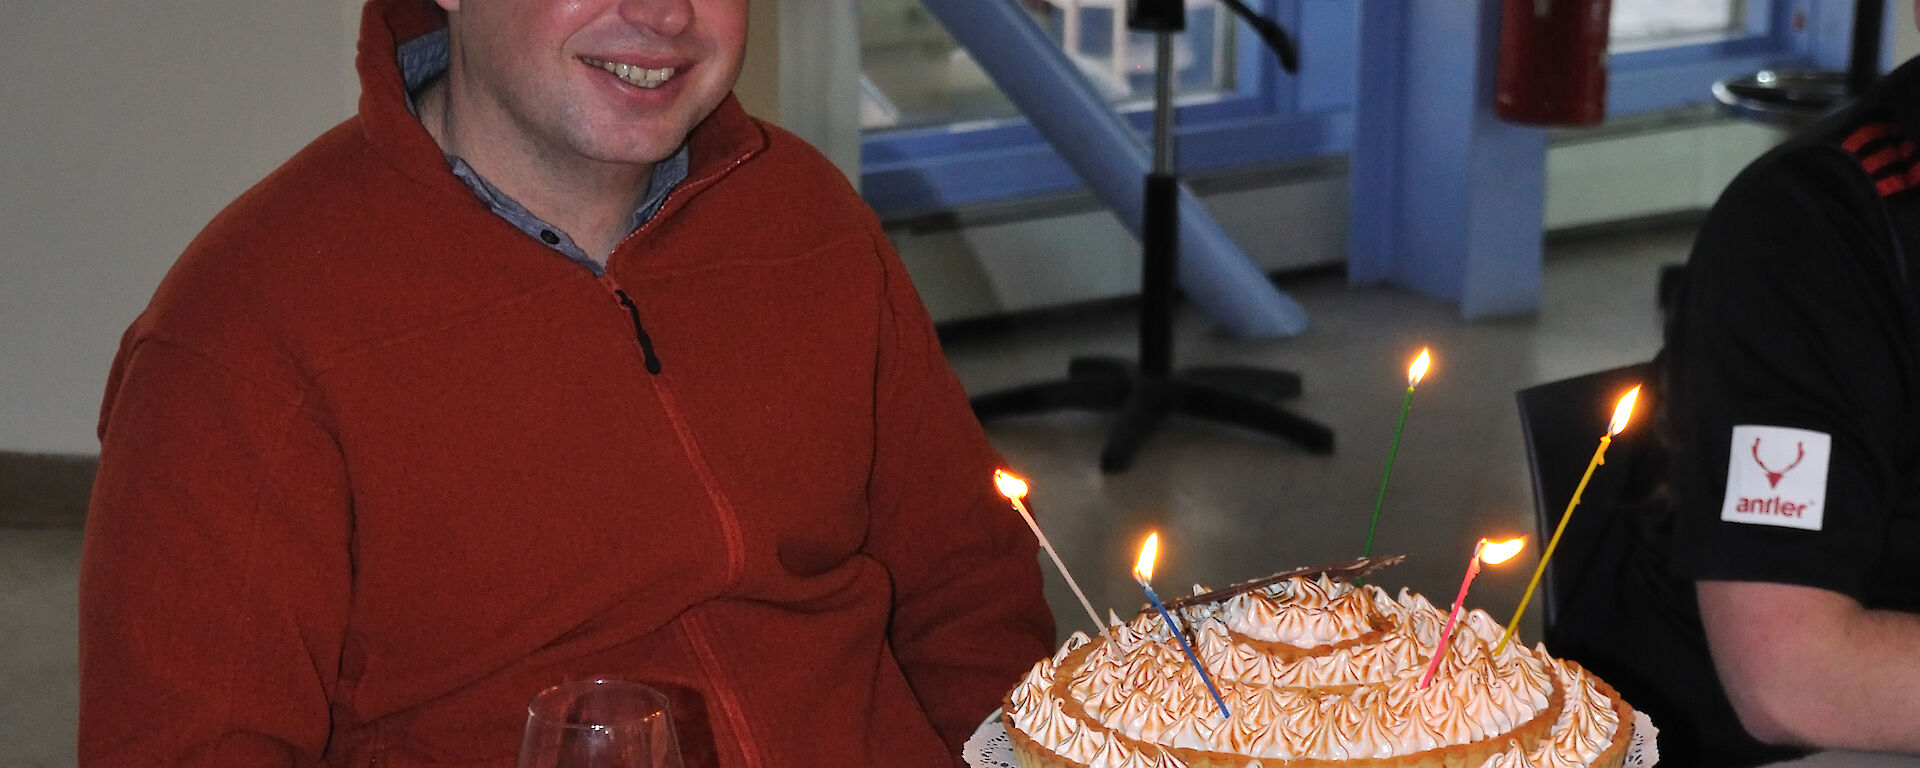 A expeditioner at Casey station celebrates his birthday